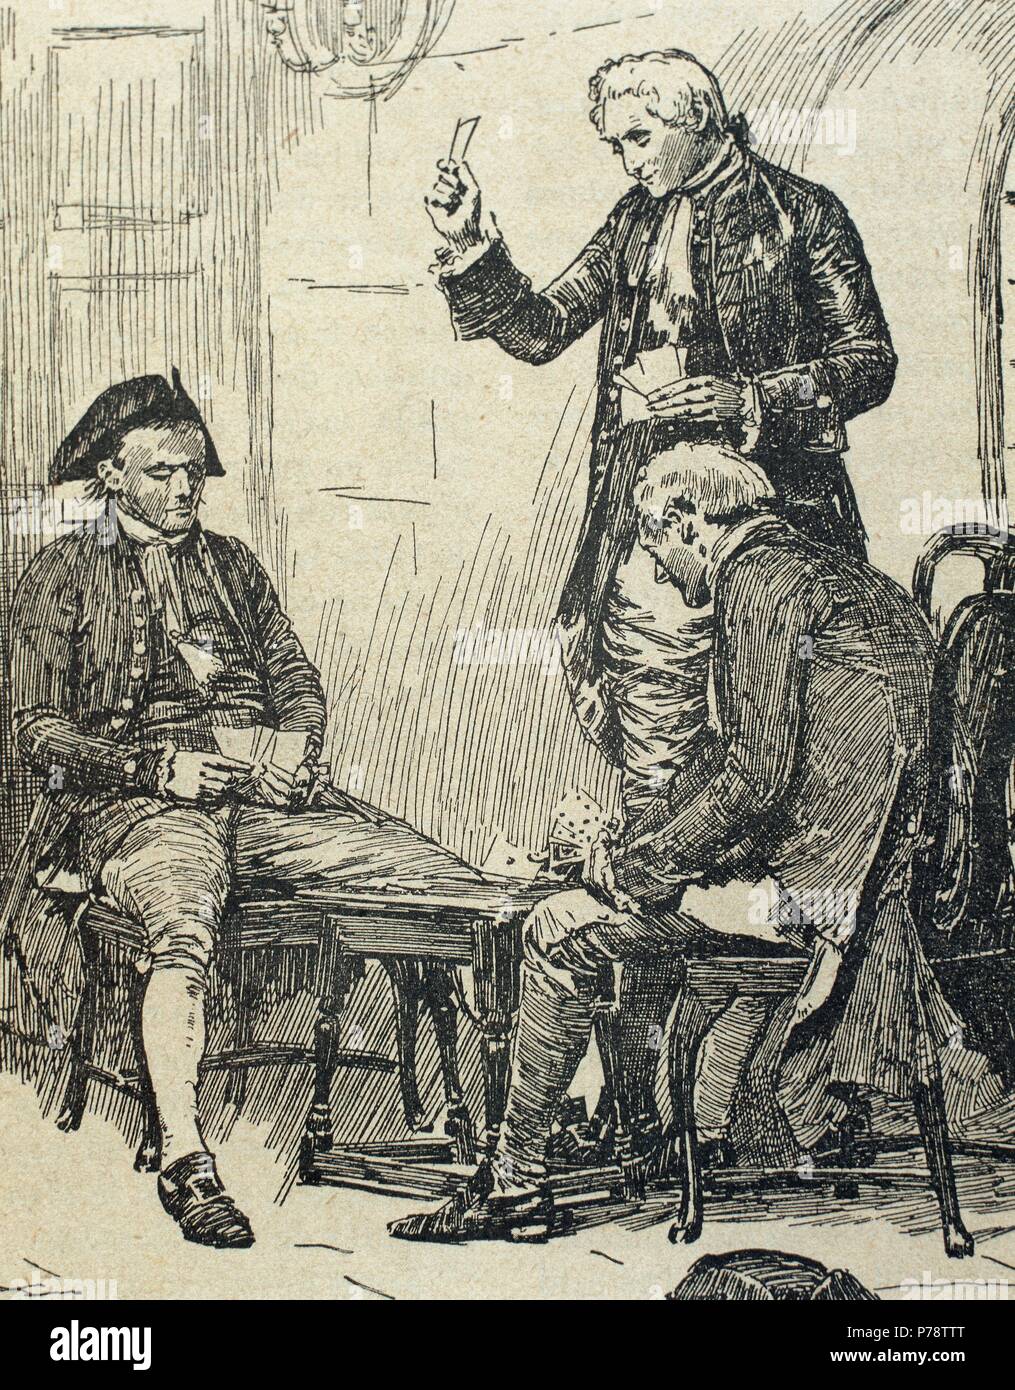 French revolution. 1789-1799. Count of Ferrers playing cards with his jailers before his execution. Engraving. 19th century. Stock Photo